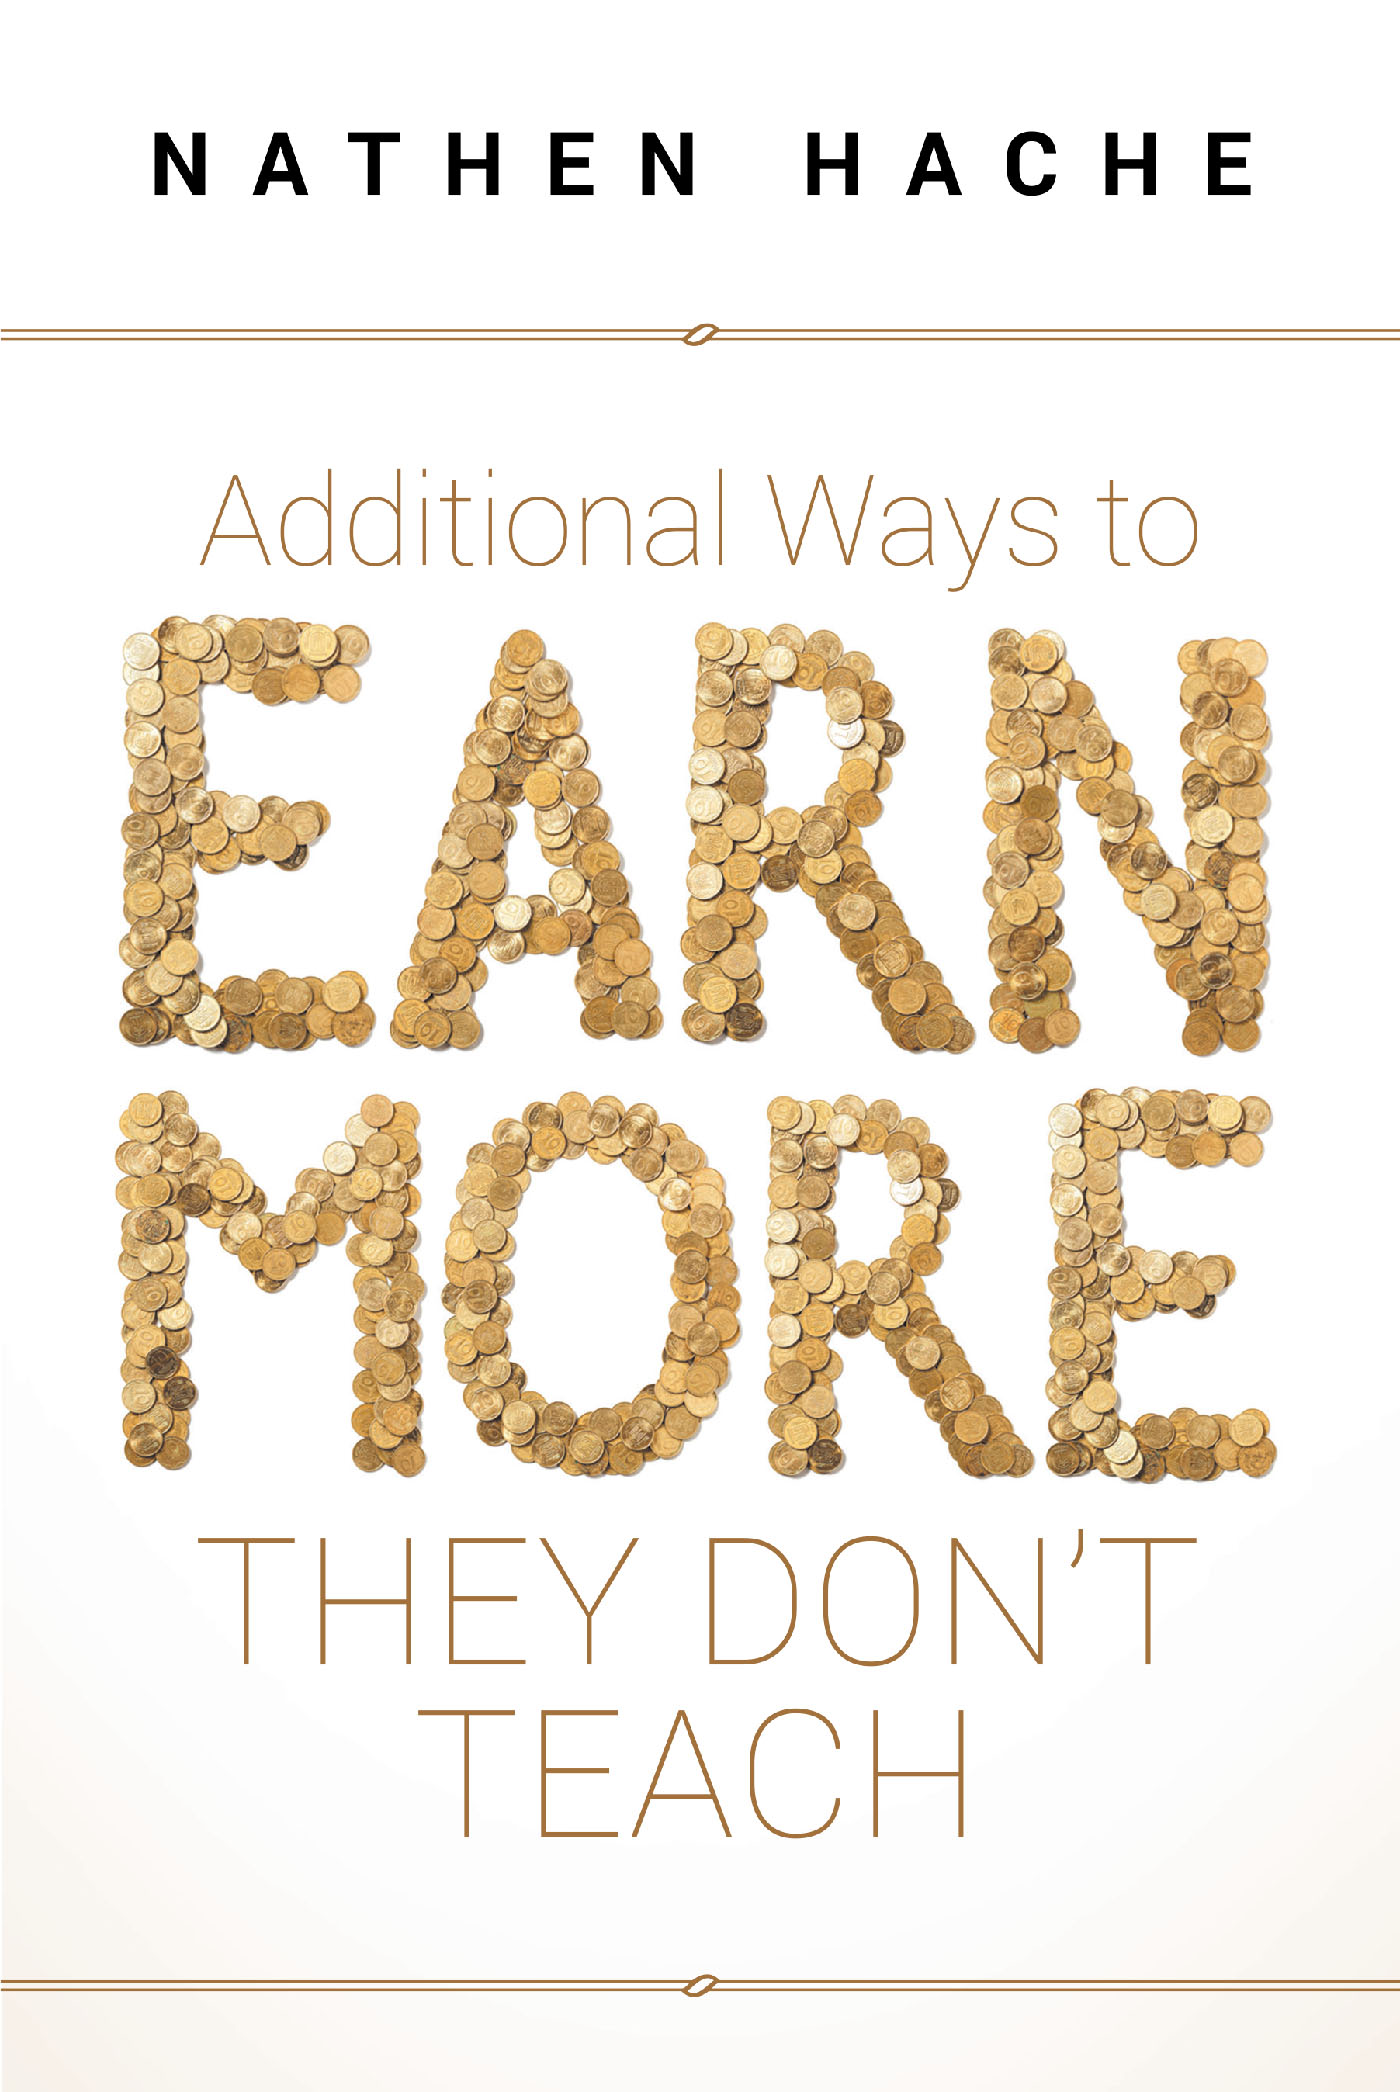 Additional Ways to Earn More They Don't Teach  Cover Image